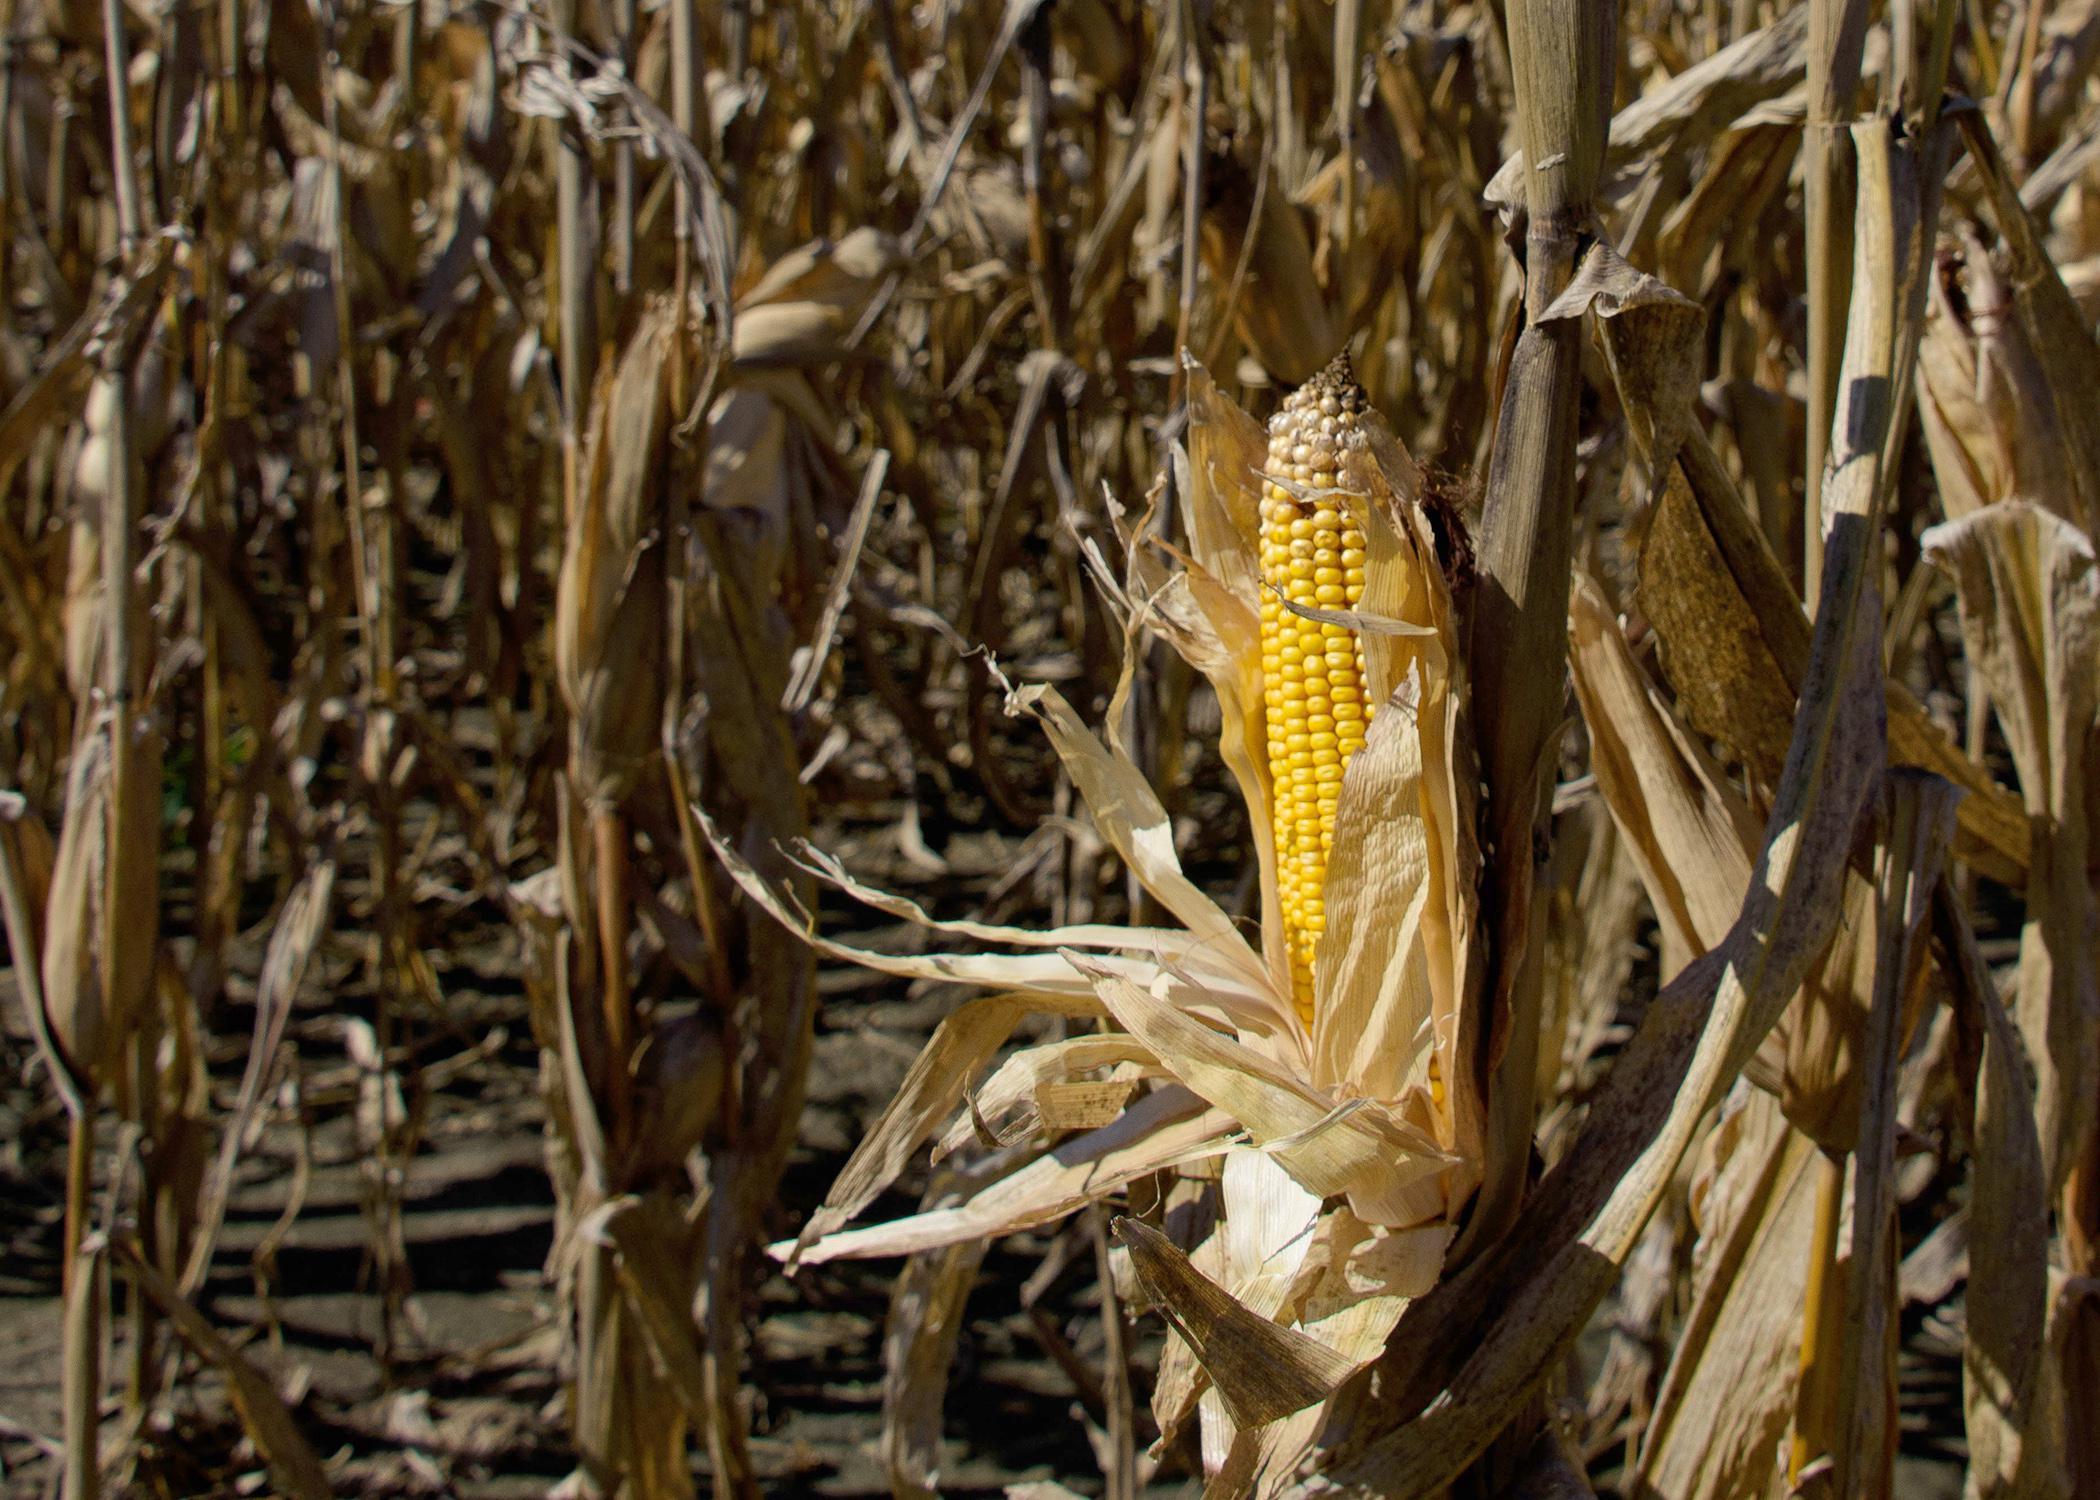 An ear of corn in front of a backdrop of stalks.